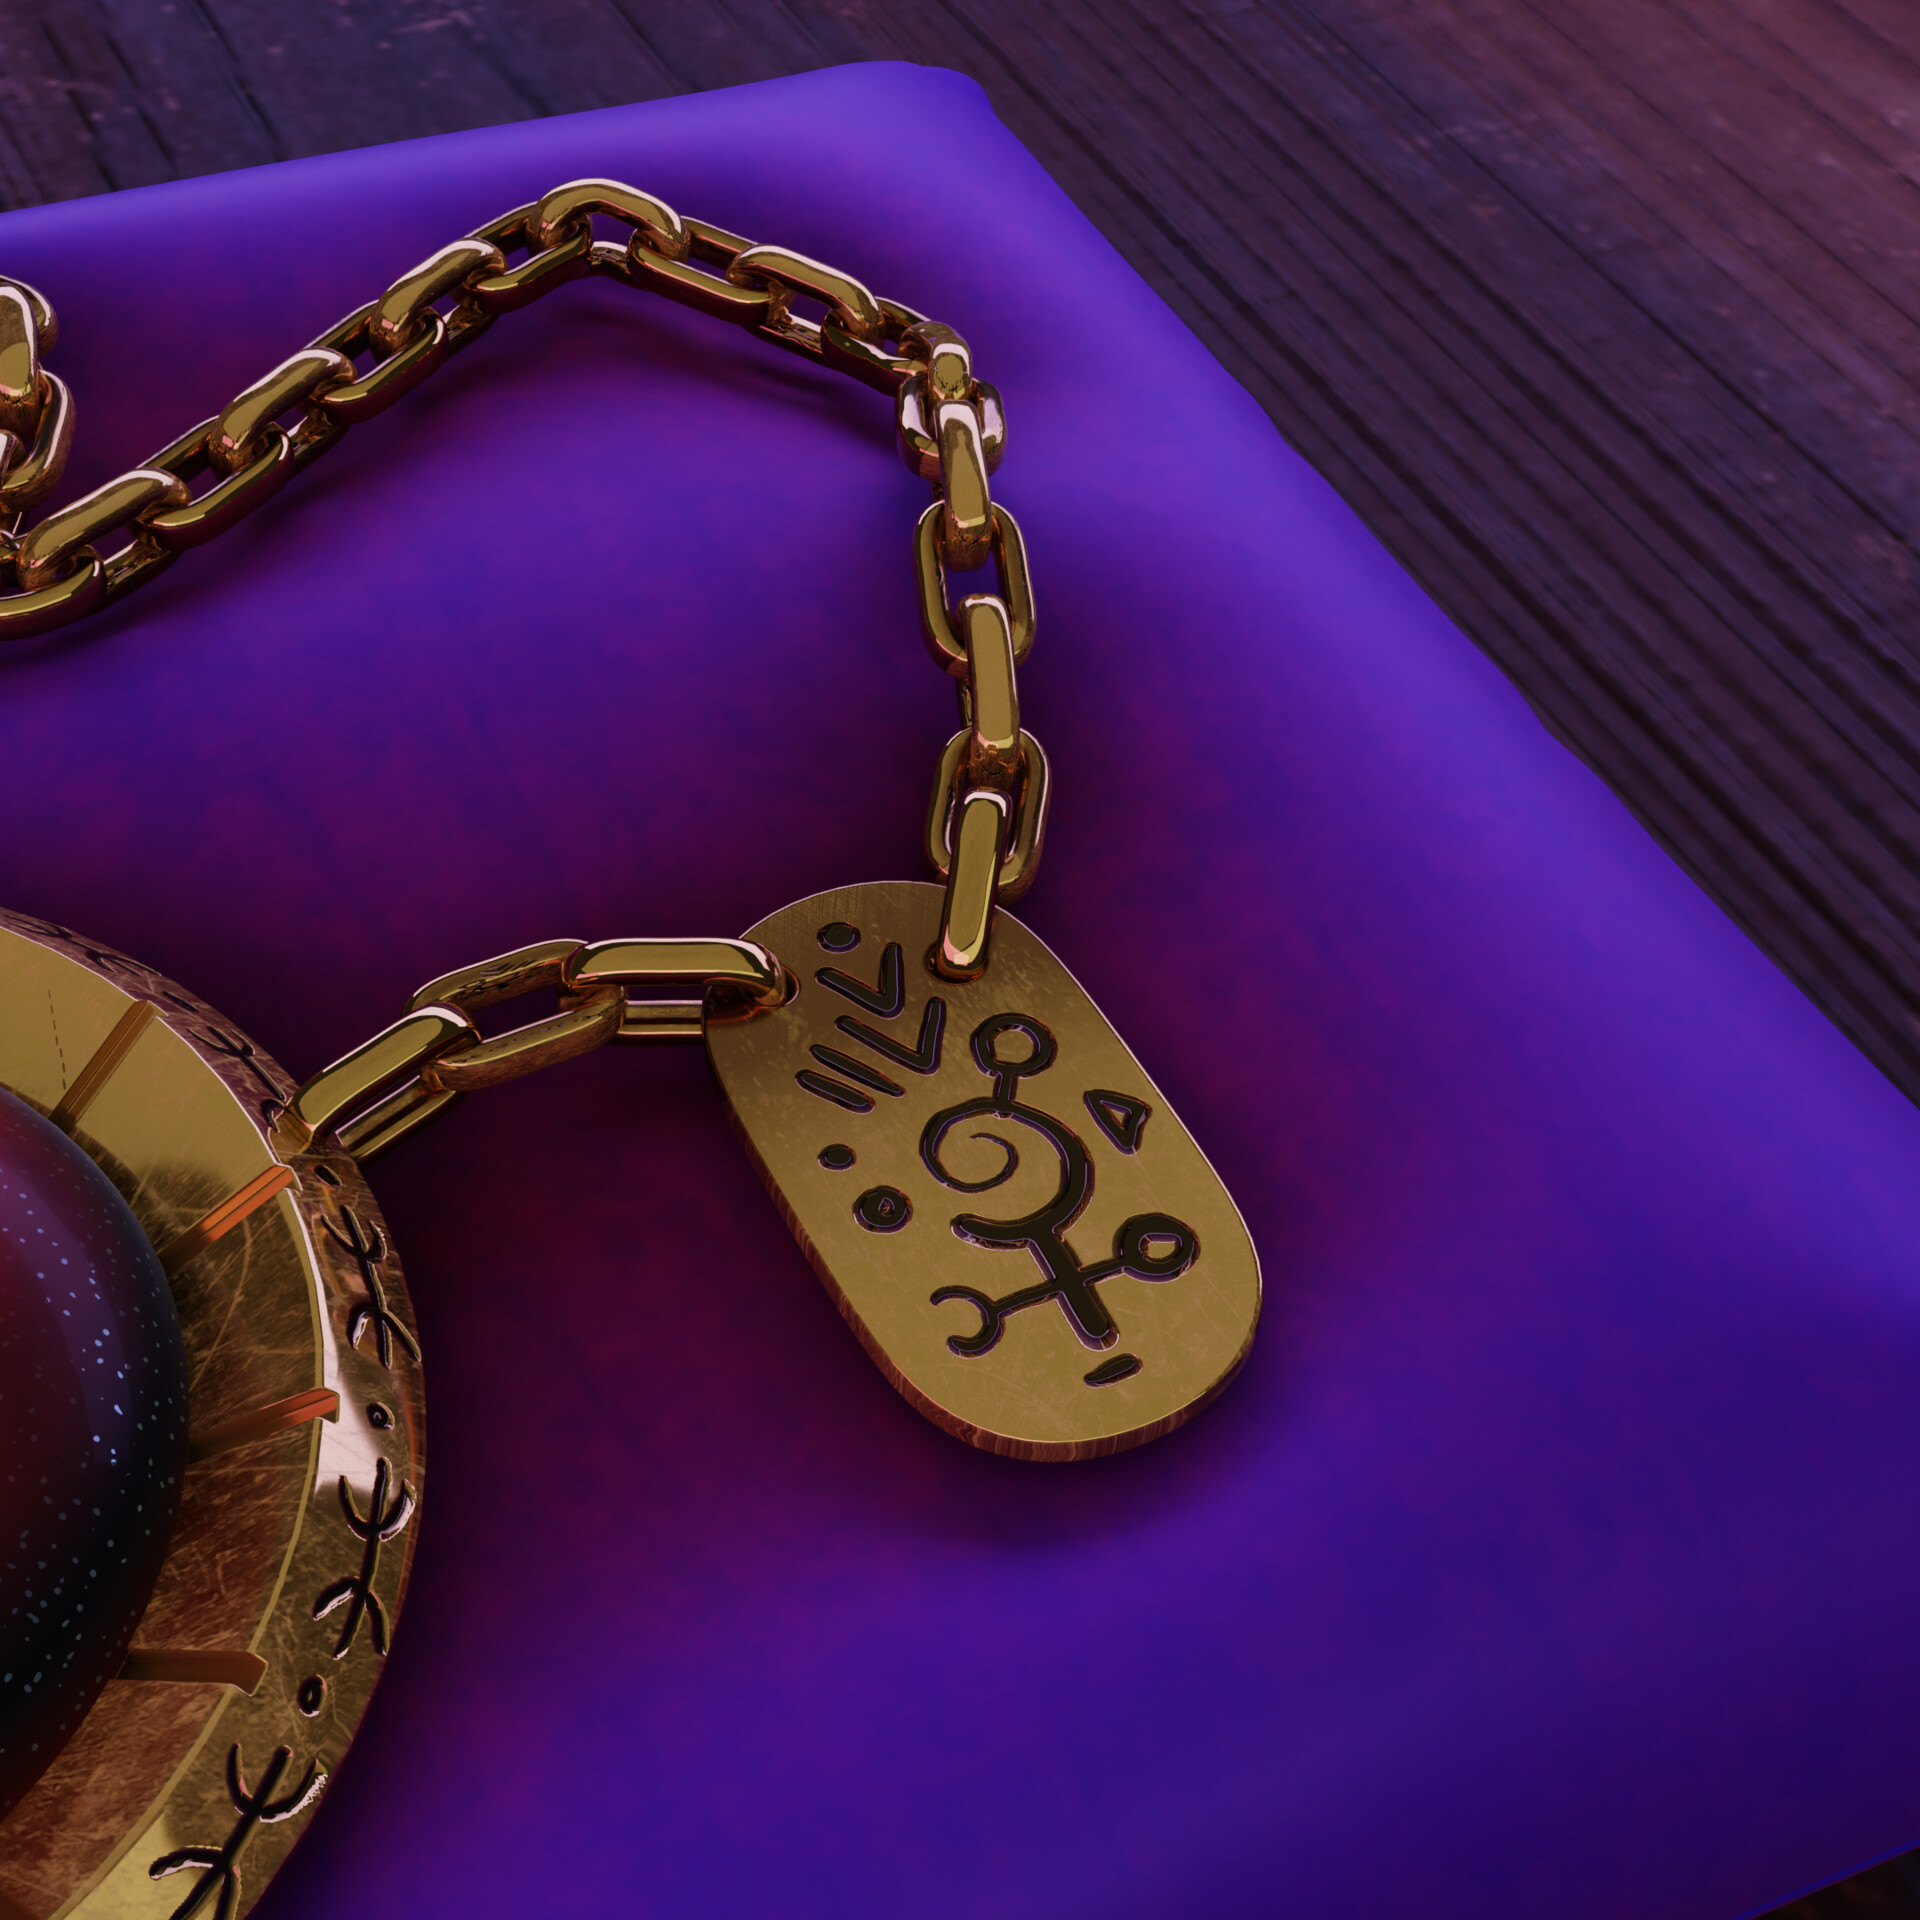 Quanzhi Fashi Little Roach Amulet Cosplay Jewelry, 3D models download